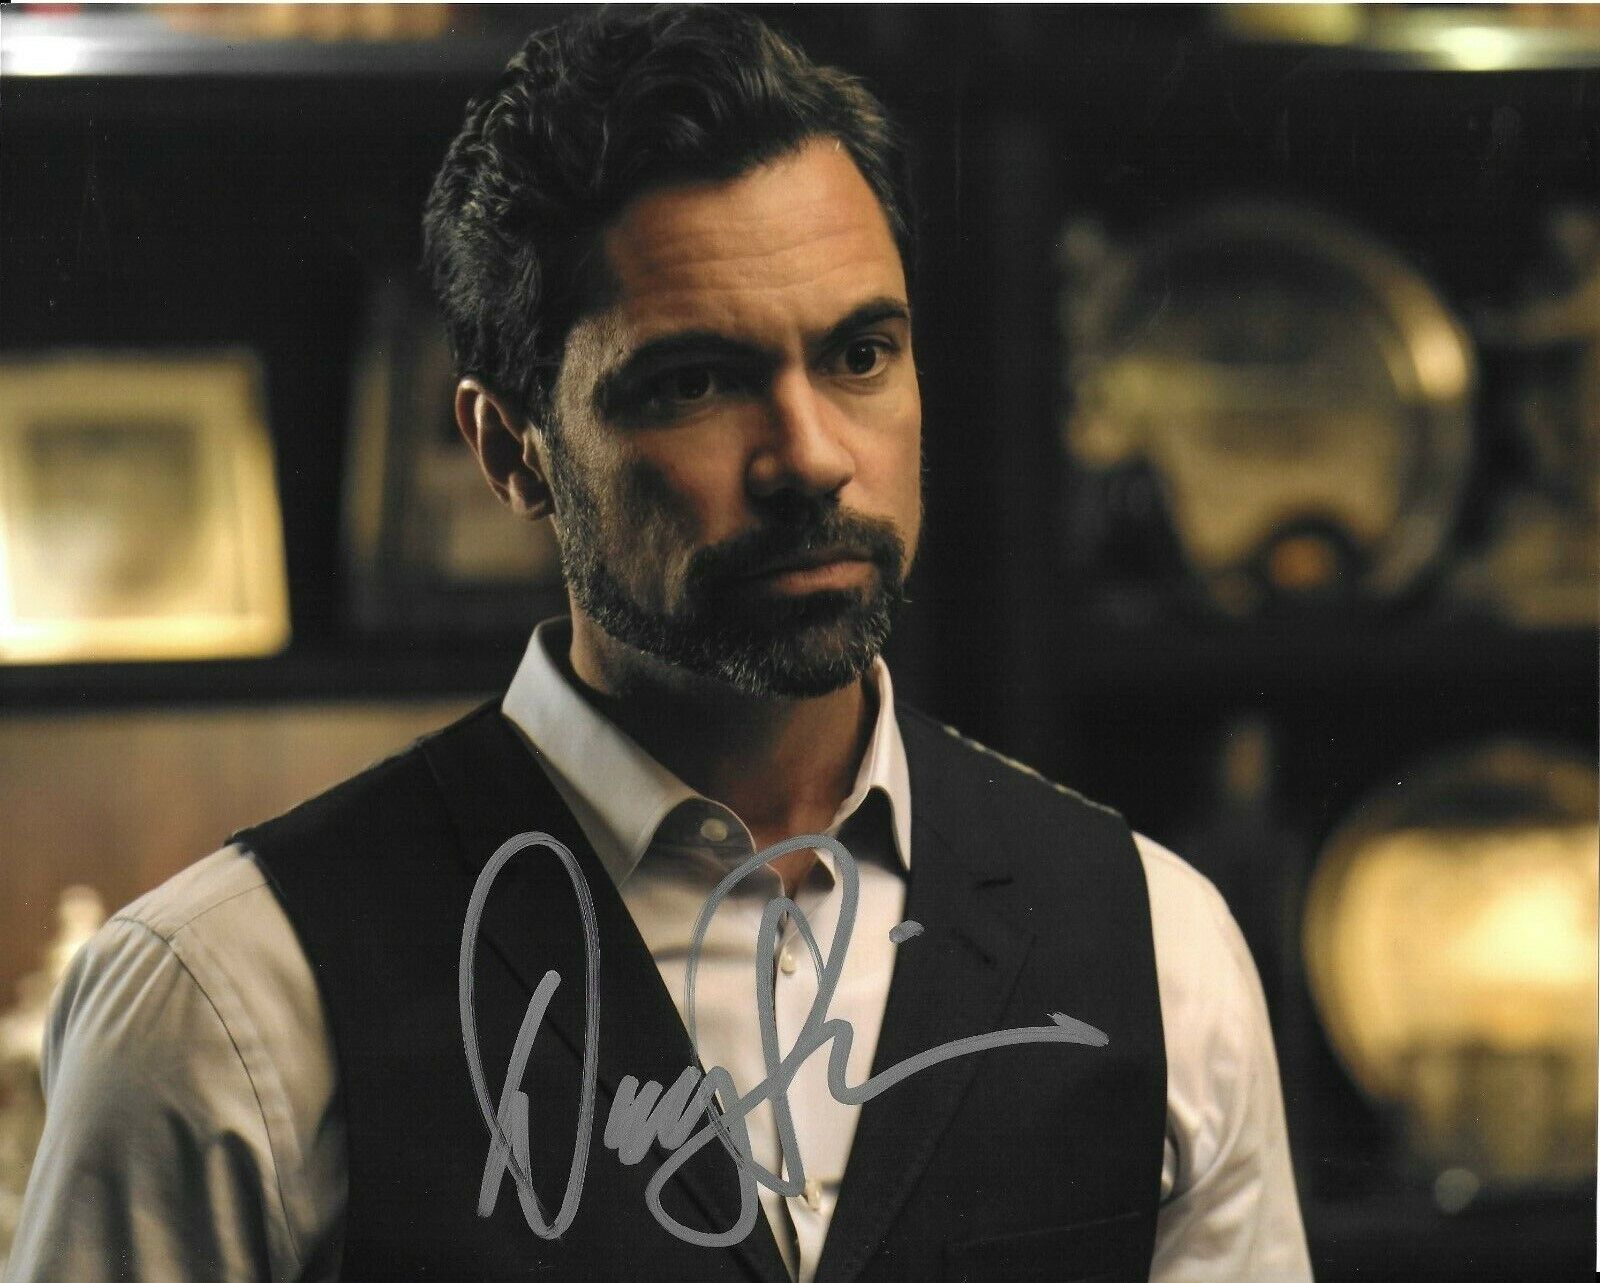 Danny Pino Mayans M.C. autographed Photo Poster painting signed 8x10 #6 Miguel Galindo